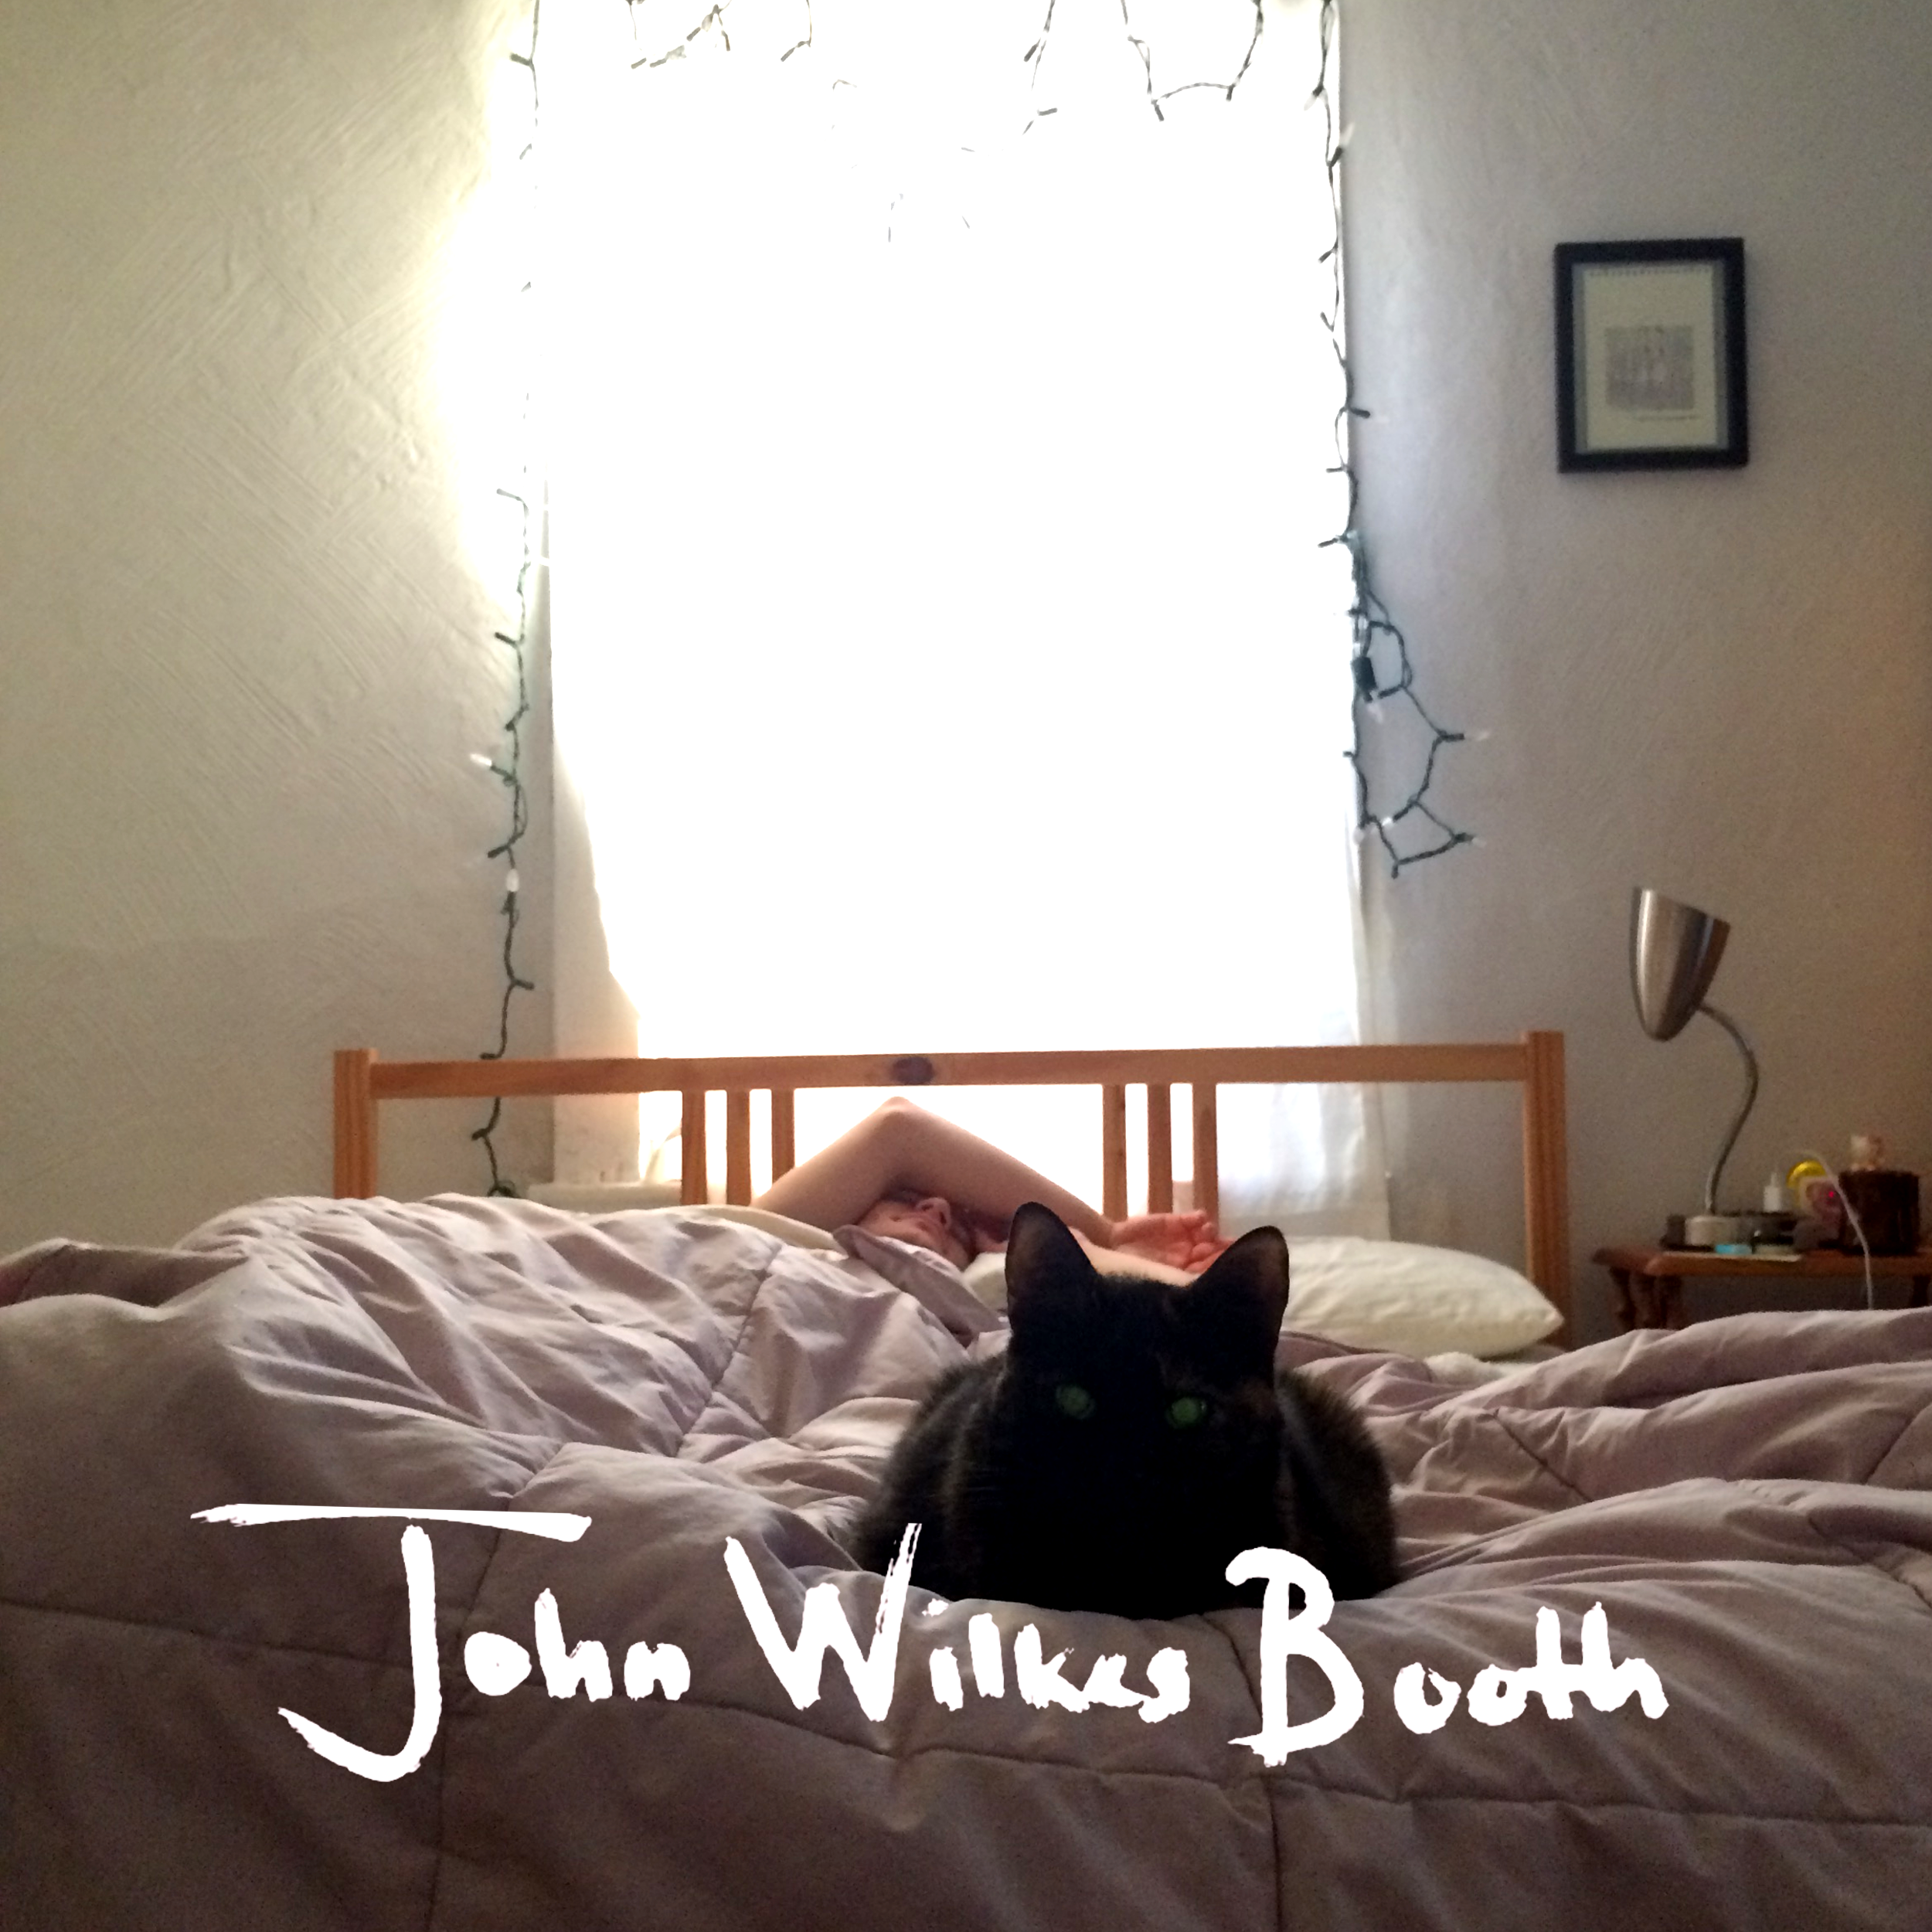 John Wilkes Booth Smaller.png